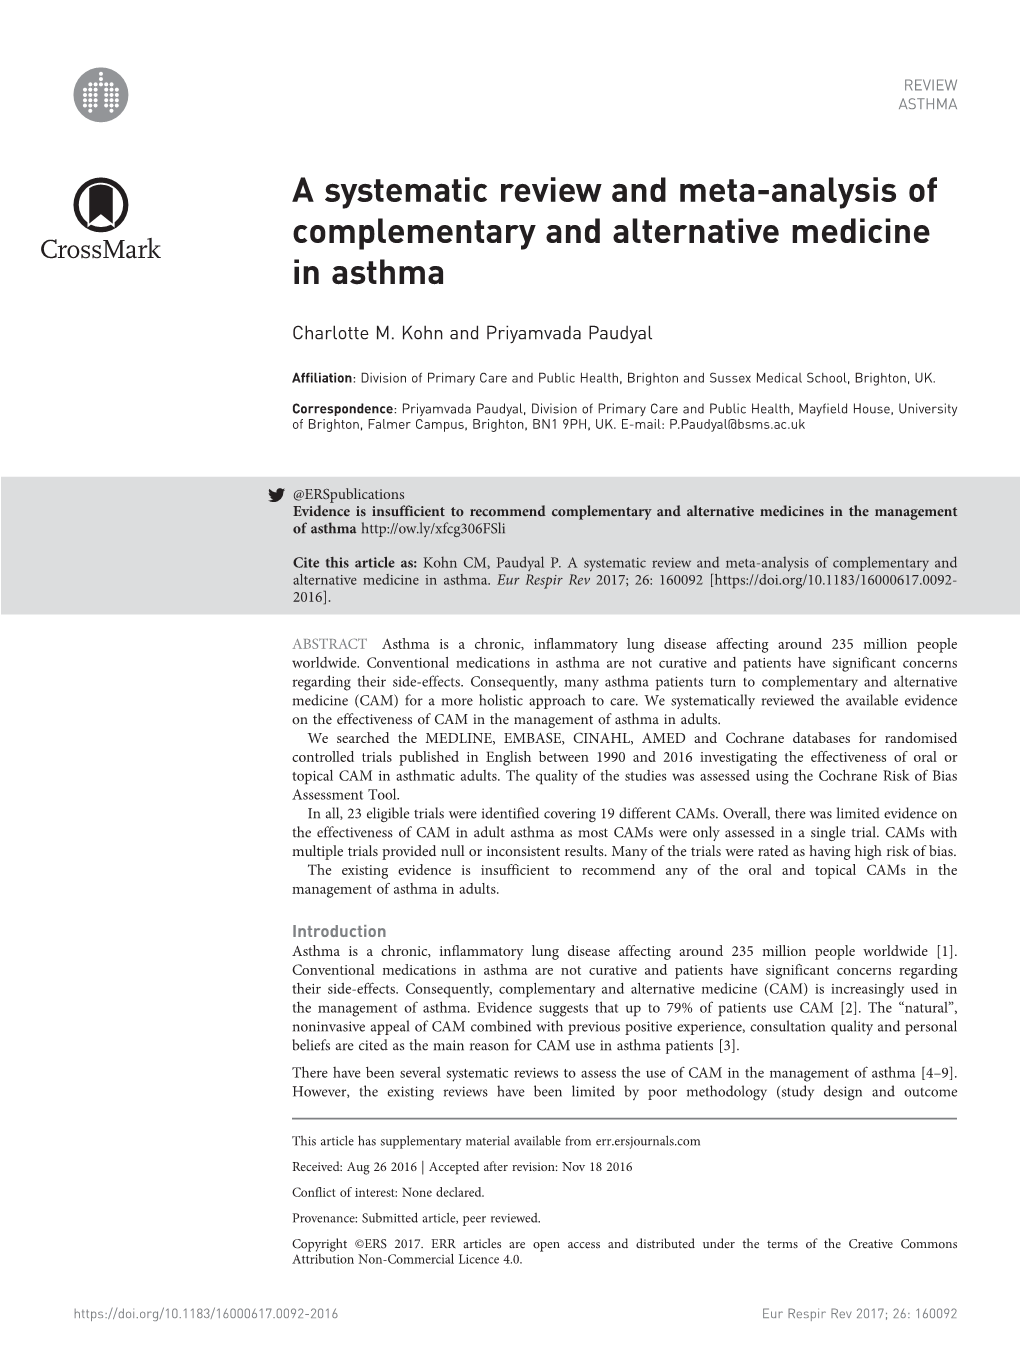 A Systematic Review and Meta-Analysis of Complementary and Alternative Medicine in Asthma